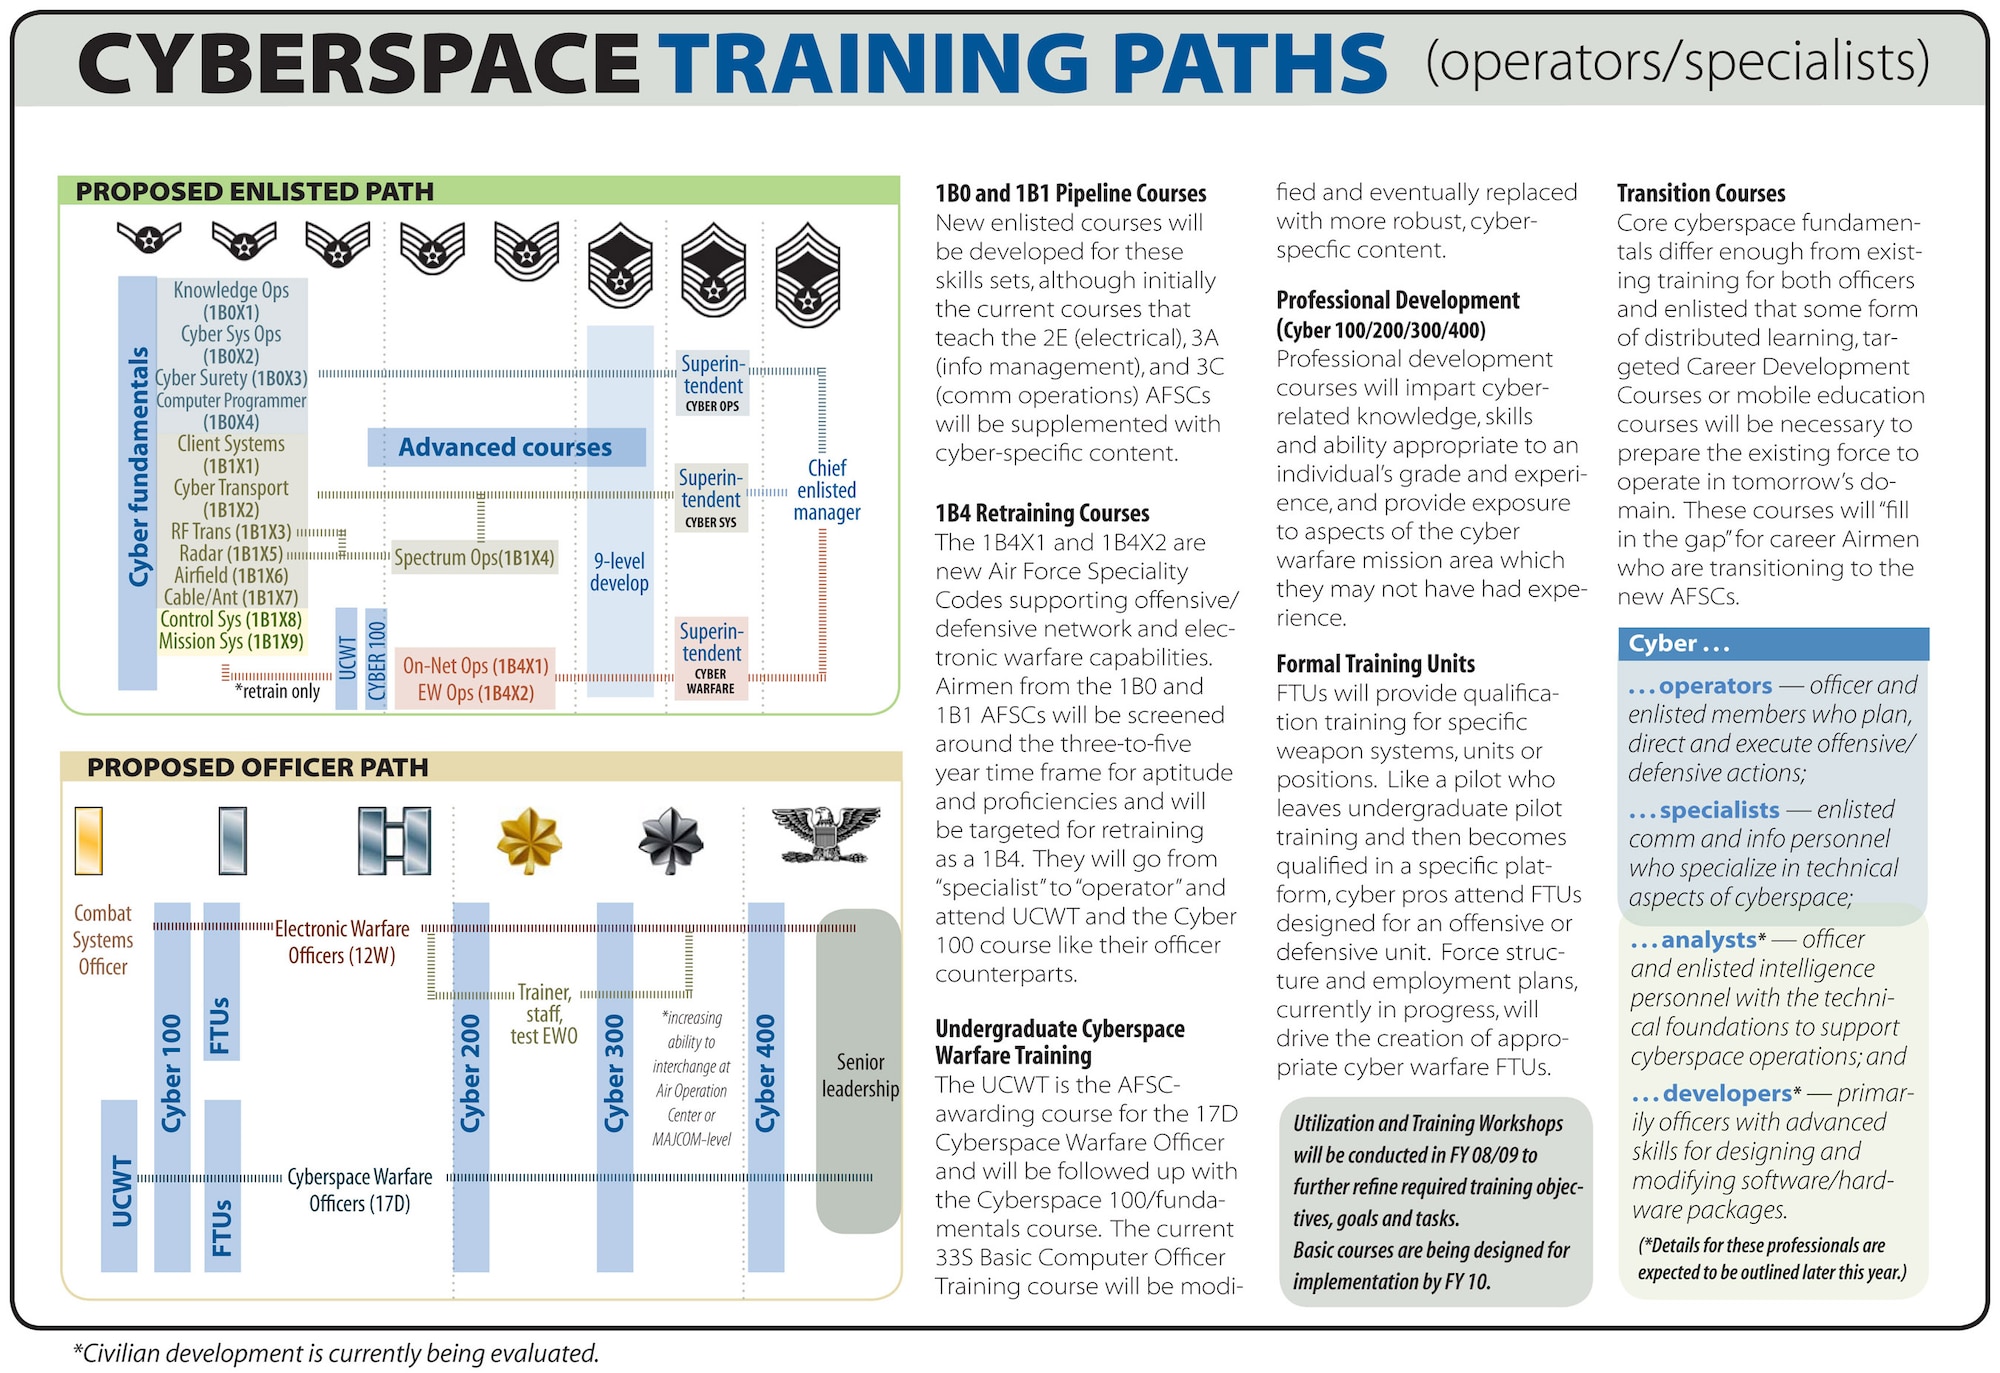 The illustration outlines the cyberspace training paths. This chart deals with specialists and operators. The analysts and developers, as well as civilian paths, are under review. 
